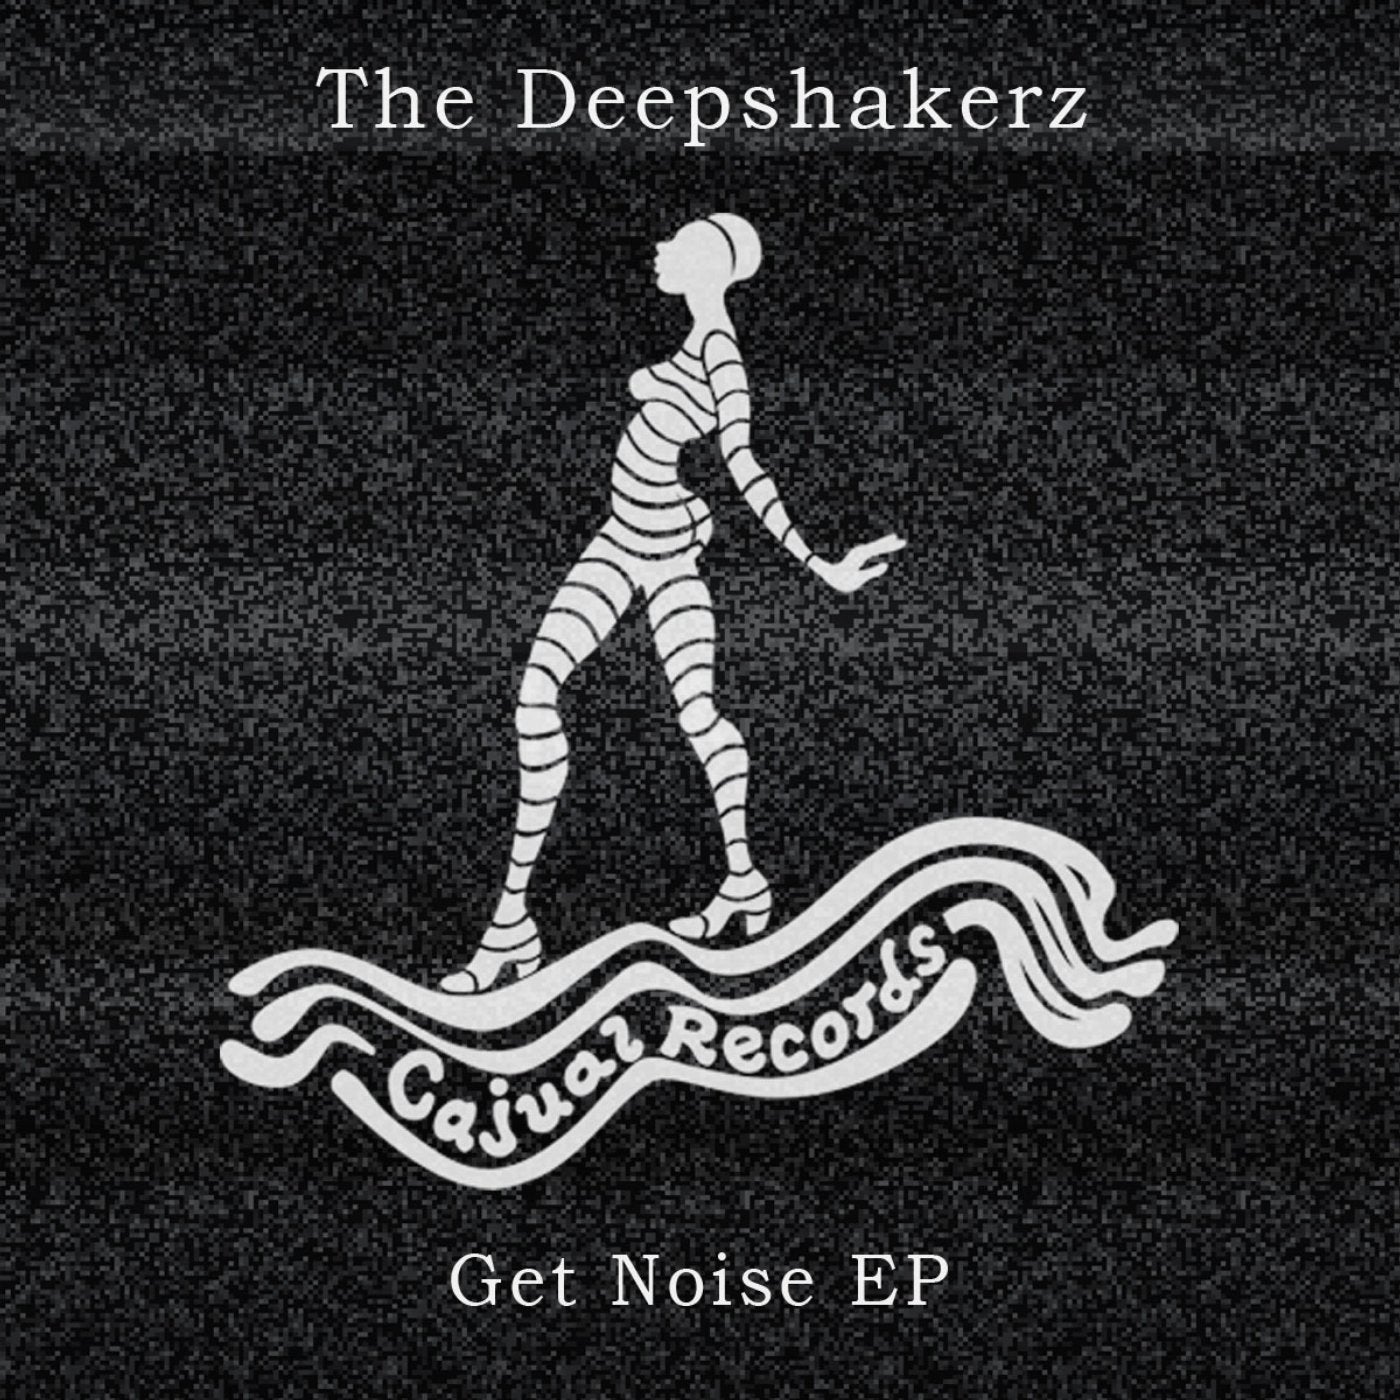 Get Noise EP